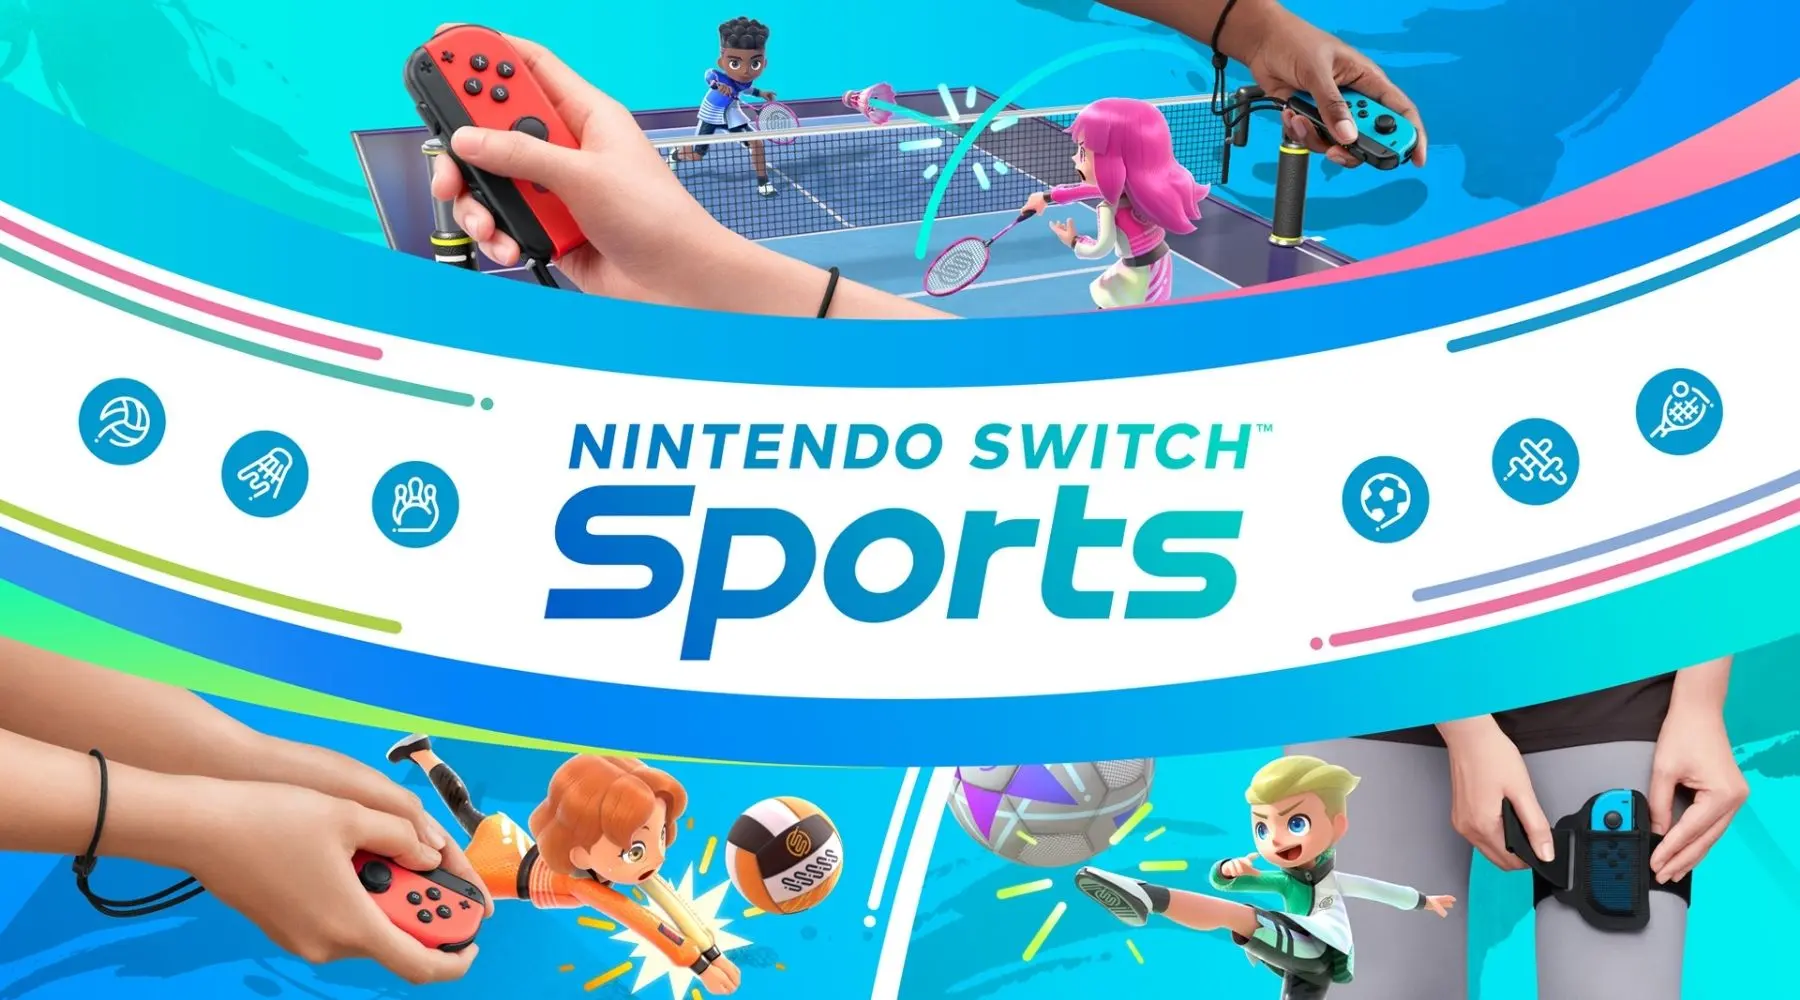 NintendoSwitchSports_Supplied_1800x1000